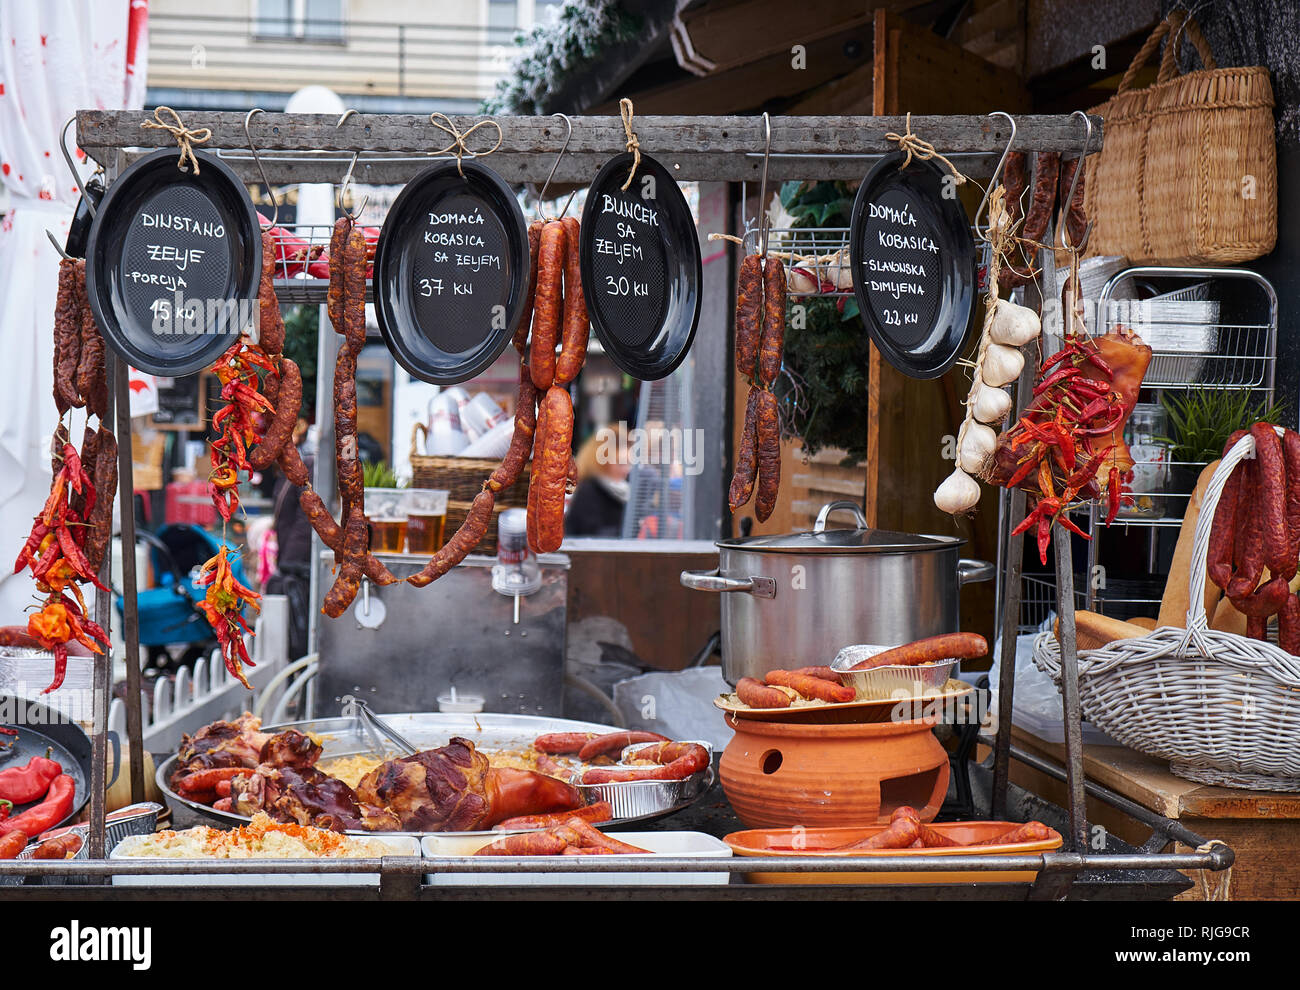 Traditional Croatian food display at the Zagreb Advent market. Sausage (Kobasica) and Pork hock (Buncek) are the highlights Stock Photo